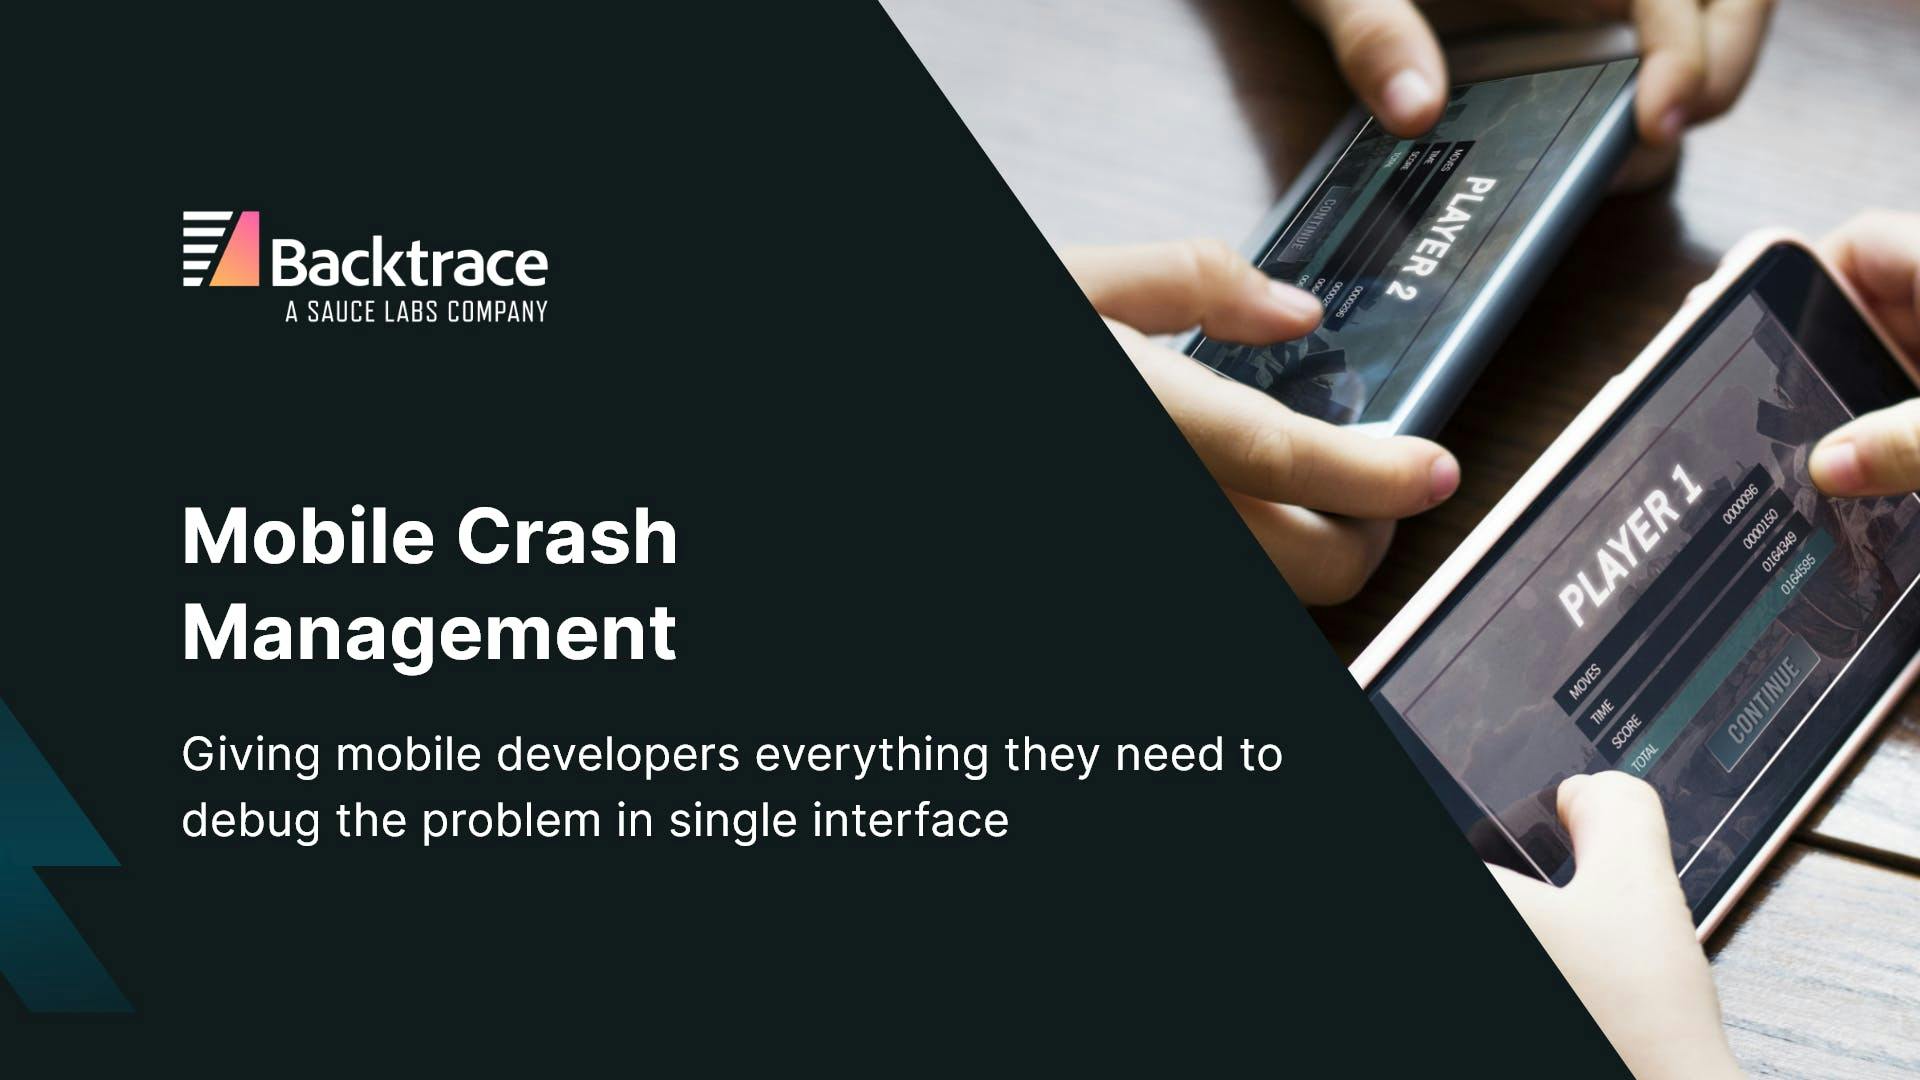 Thumbnail image for blog post: Mobile Crash Management from Backtrace